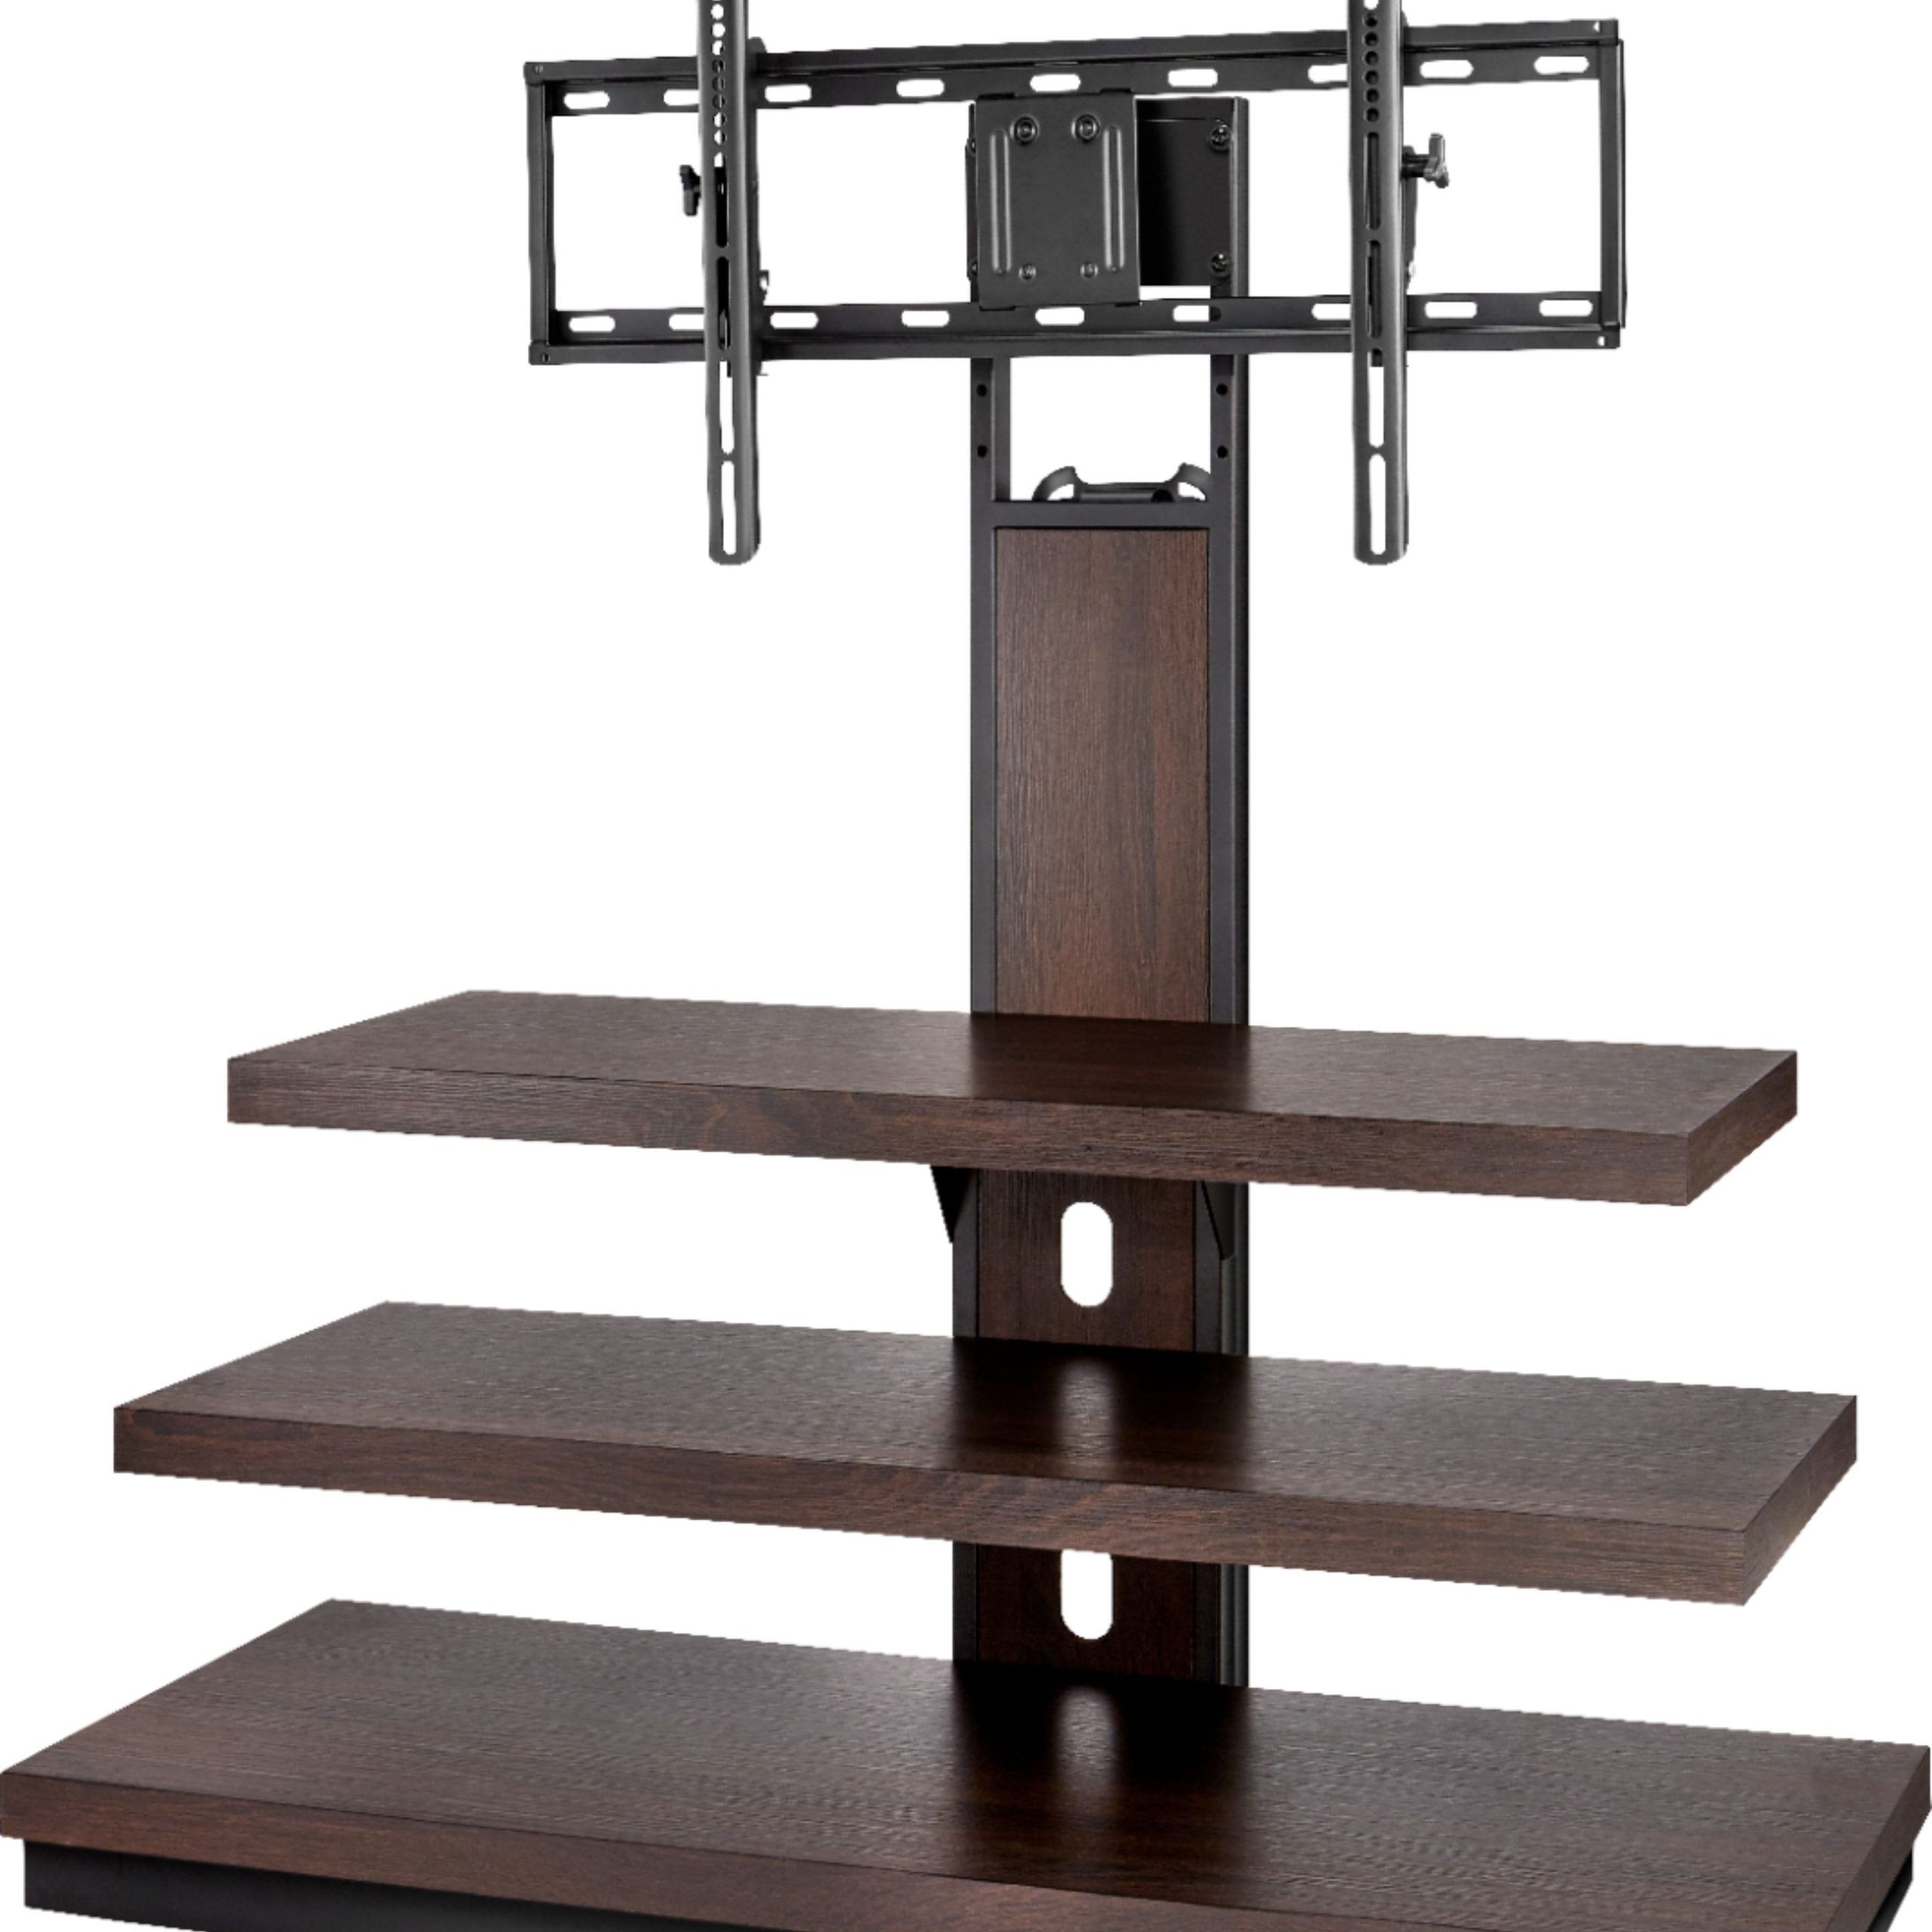 Best Buy: Insignia™ Tv Stand For Most Flat Panel Tvs Up To 55" Dark Brown  Ns Hwmc1848 Intended For Top Shelf Mount Tv Stands (View 2 of 20)